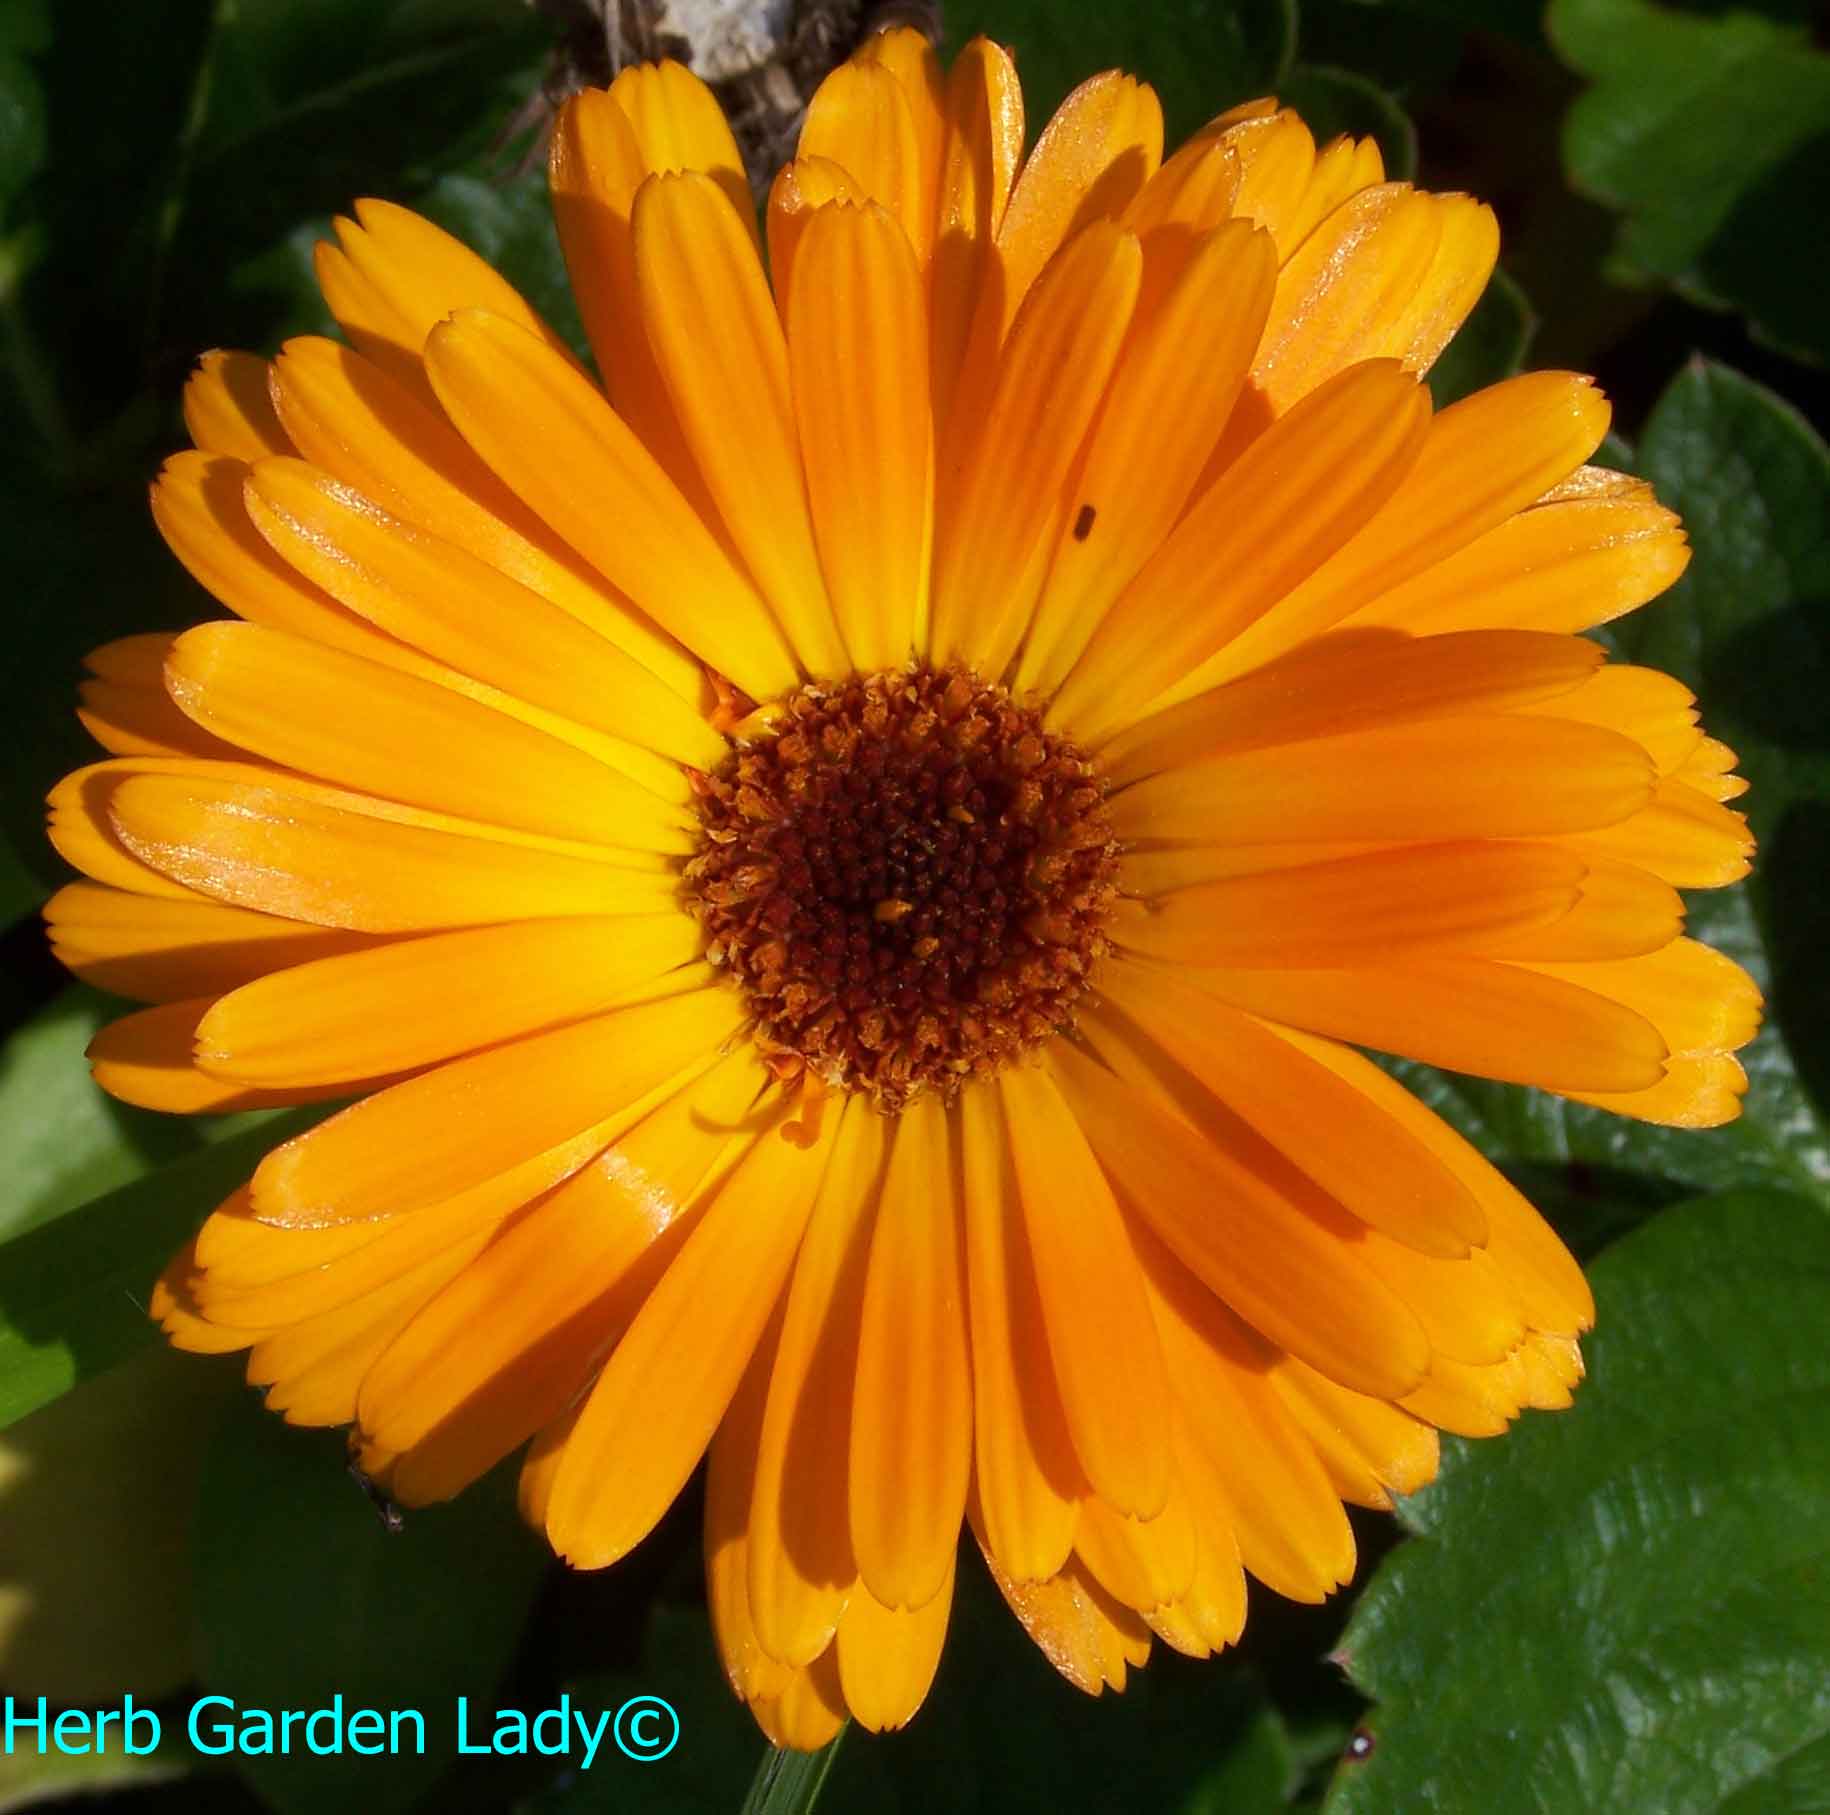 The calendula herb is a superb for dry skin and chapped lips